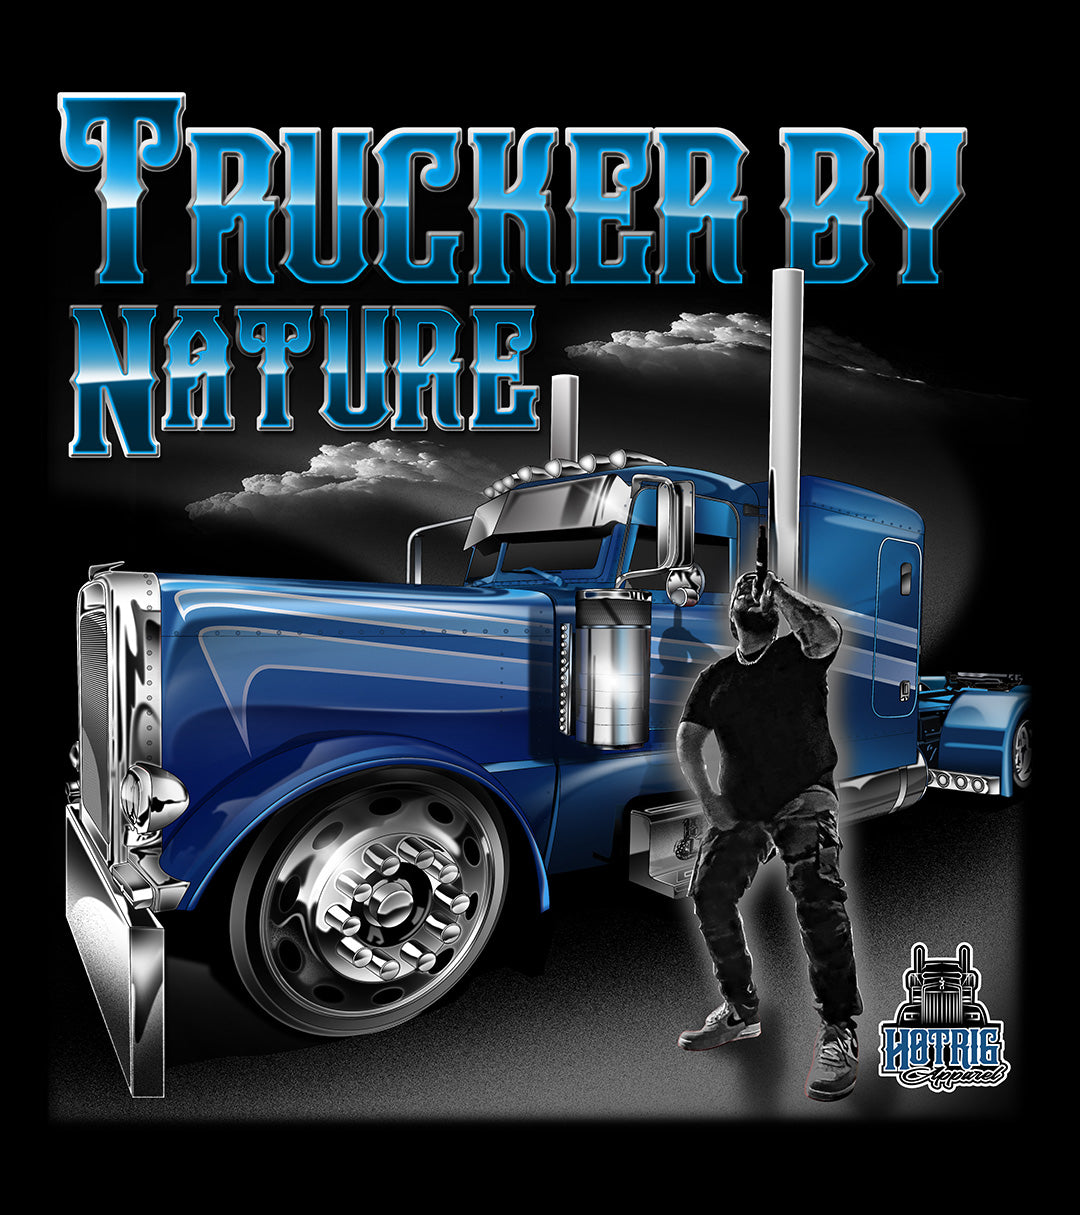 Trucker by Nature